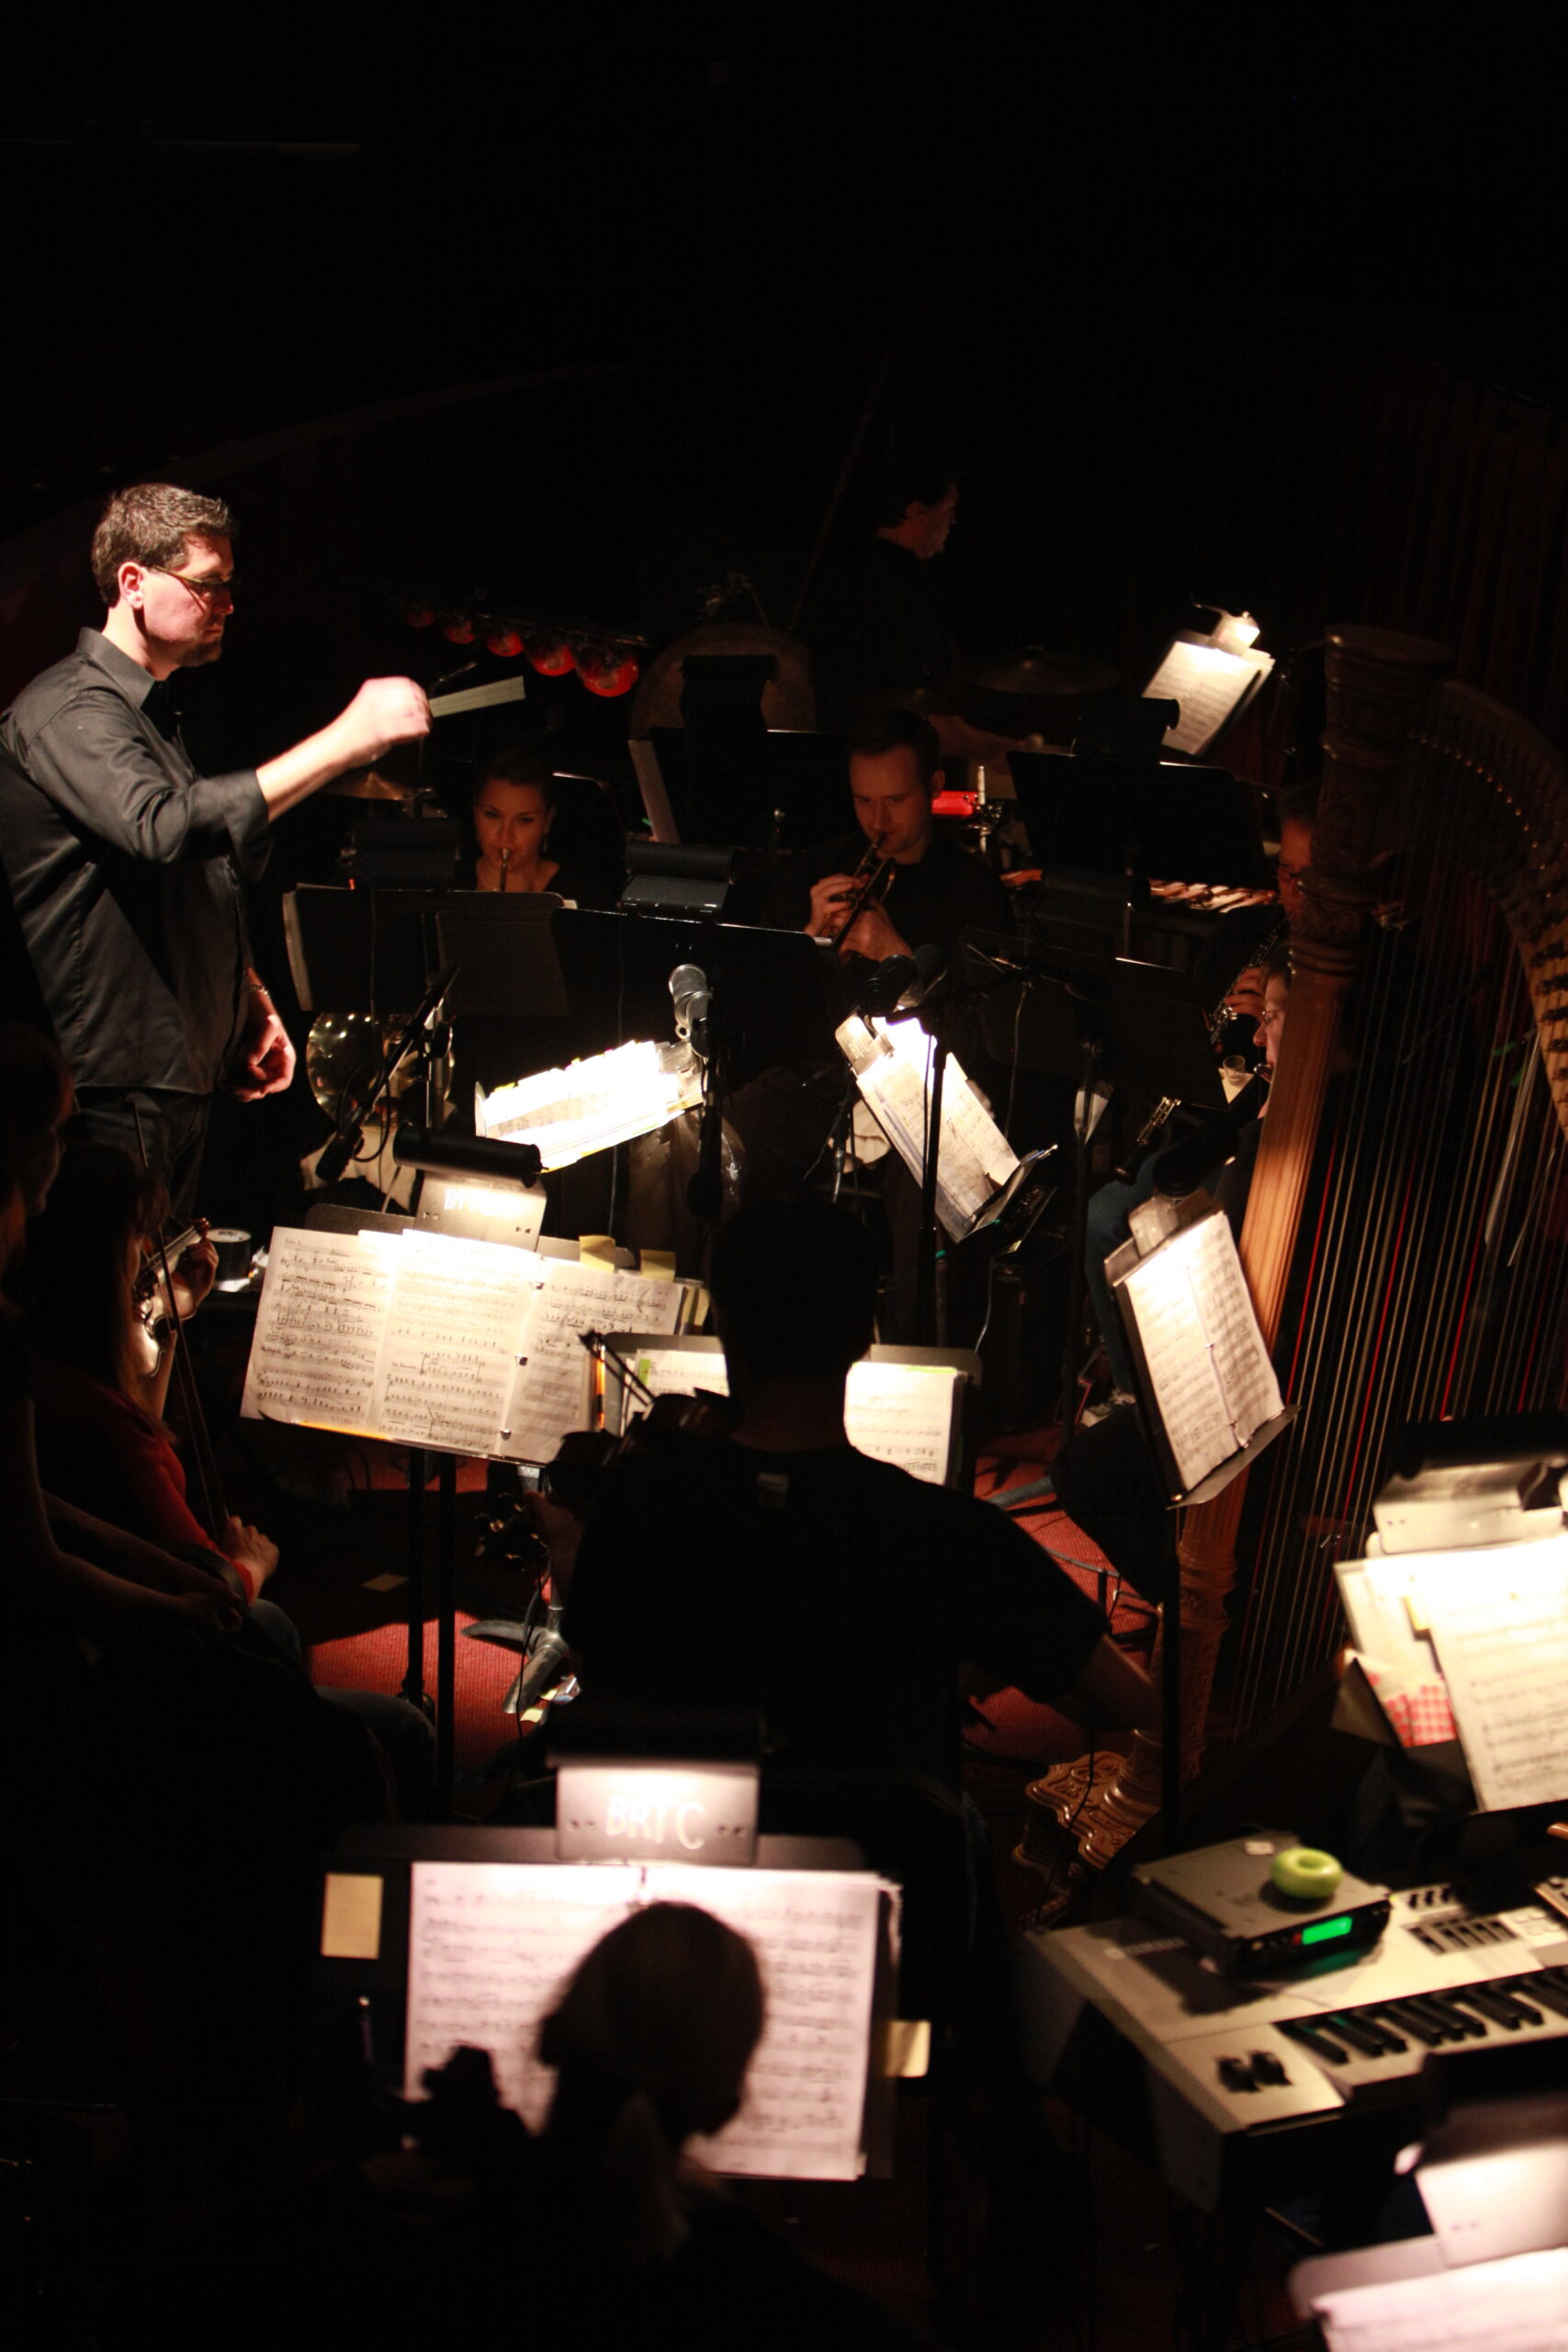 Alan conducting the orchestra for The King and I (2010).